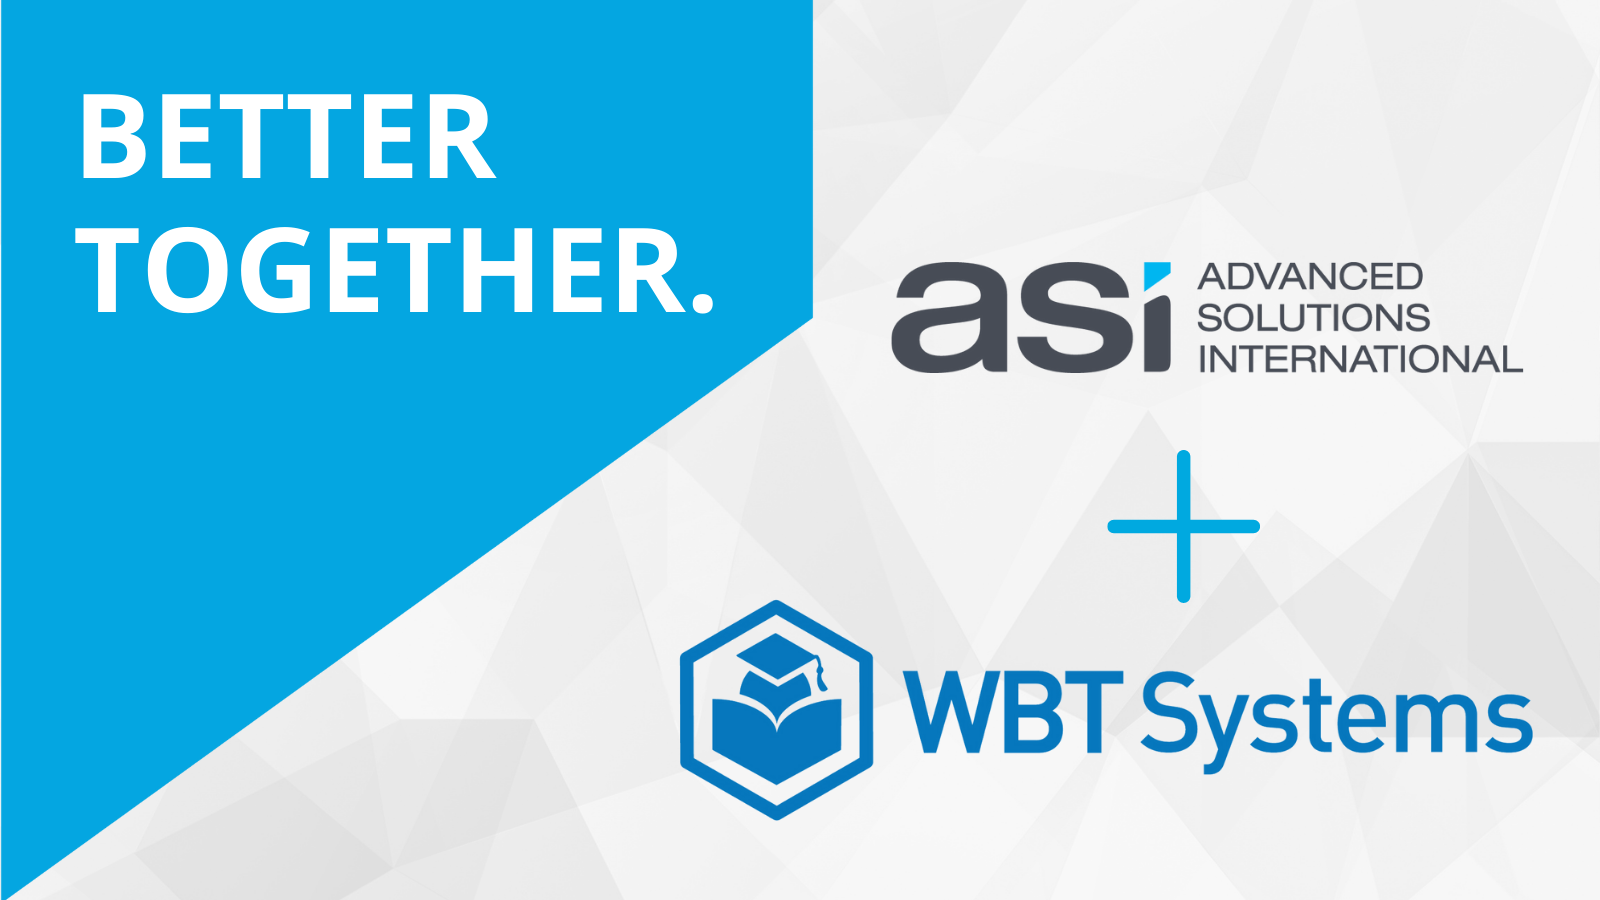 WBT Systems announces acquisition by Advanced Solutions International